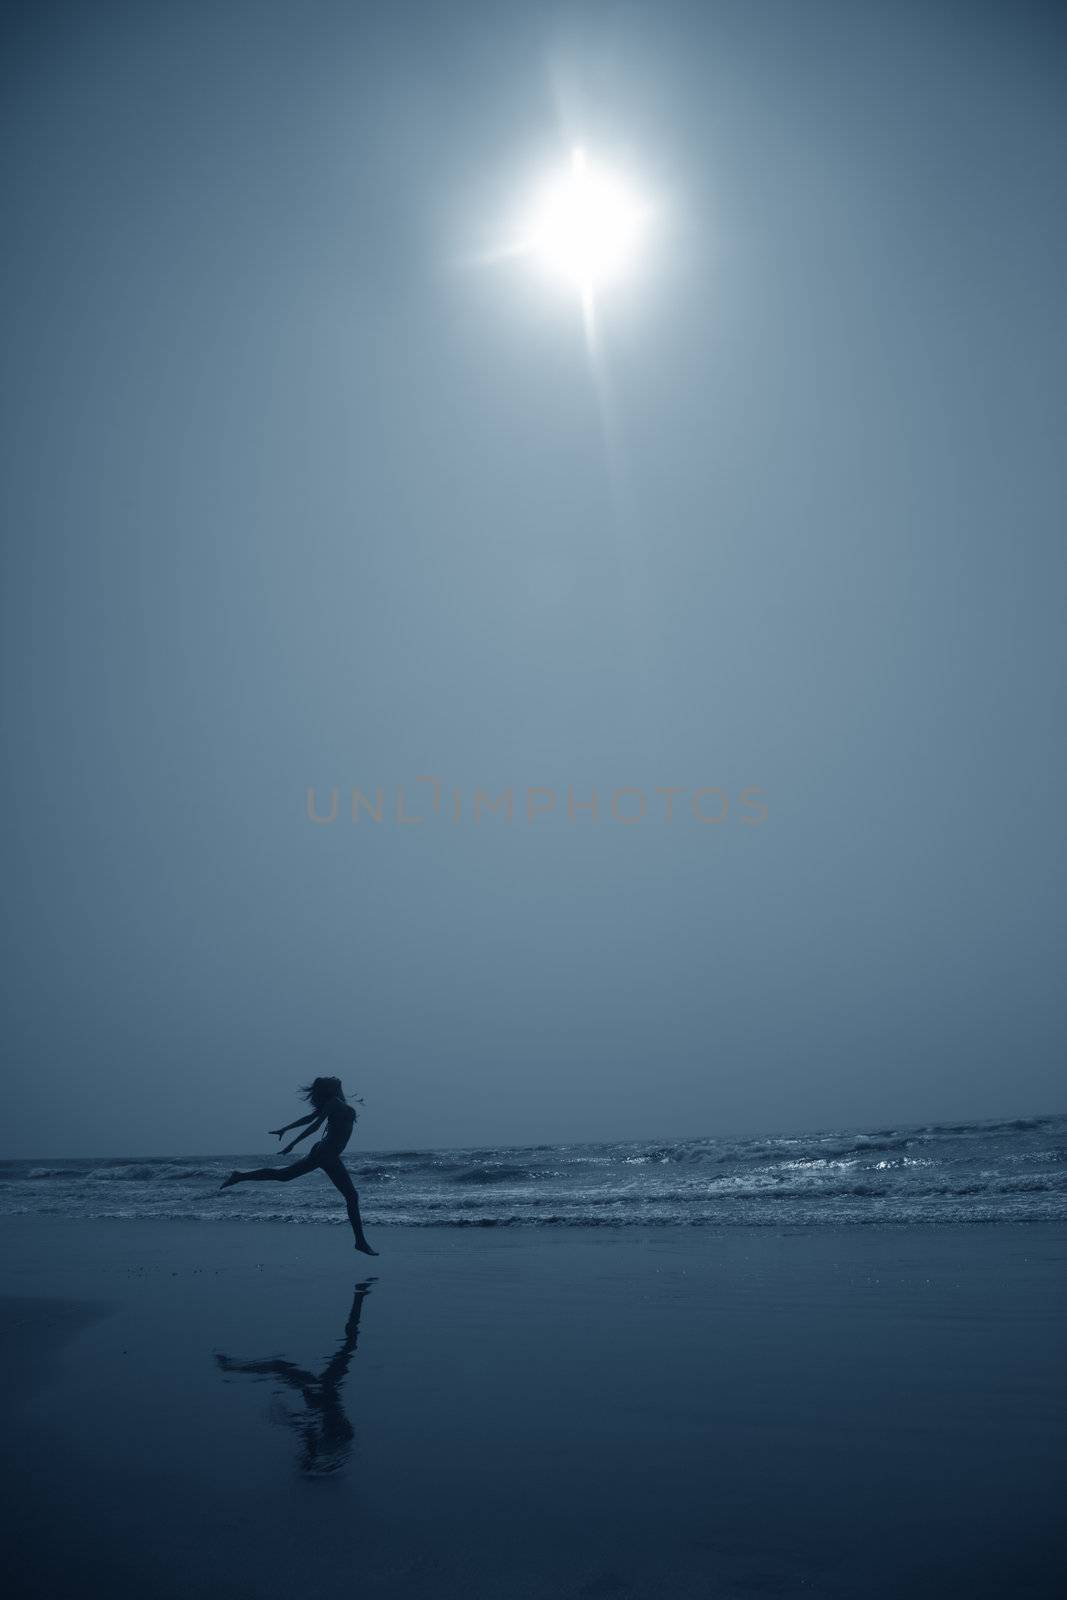 Silhouette of the lady dancing at the beach in deep dark night. Artistic blue colors toning added for coolness of the night